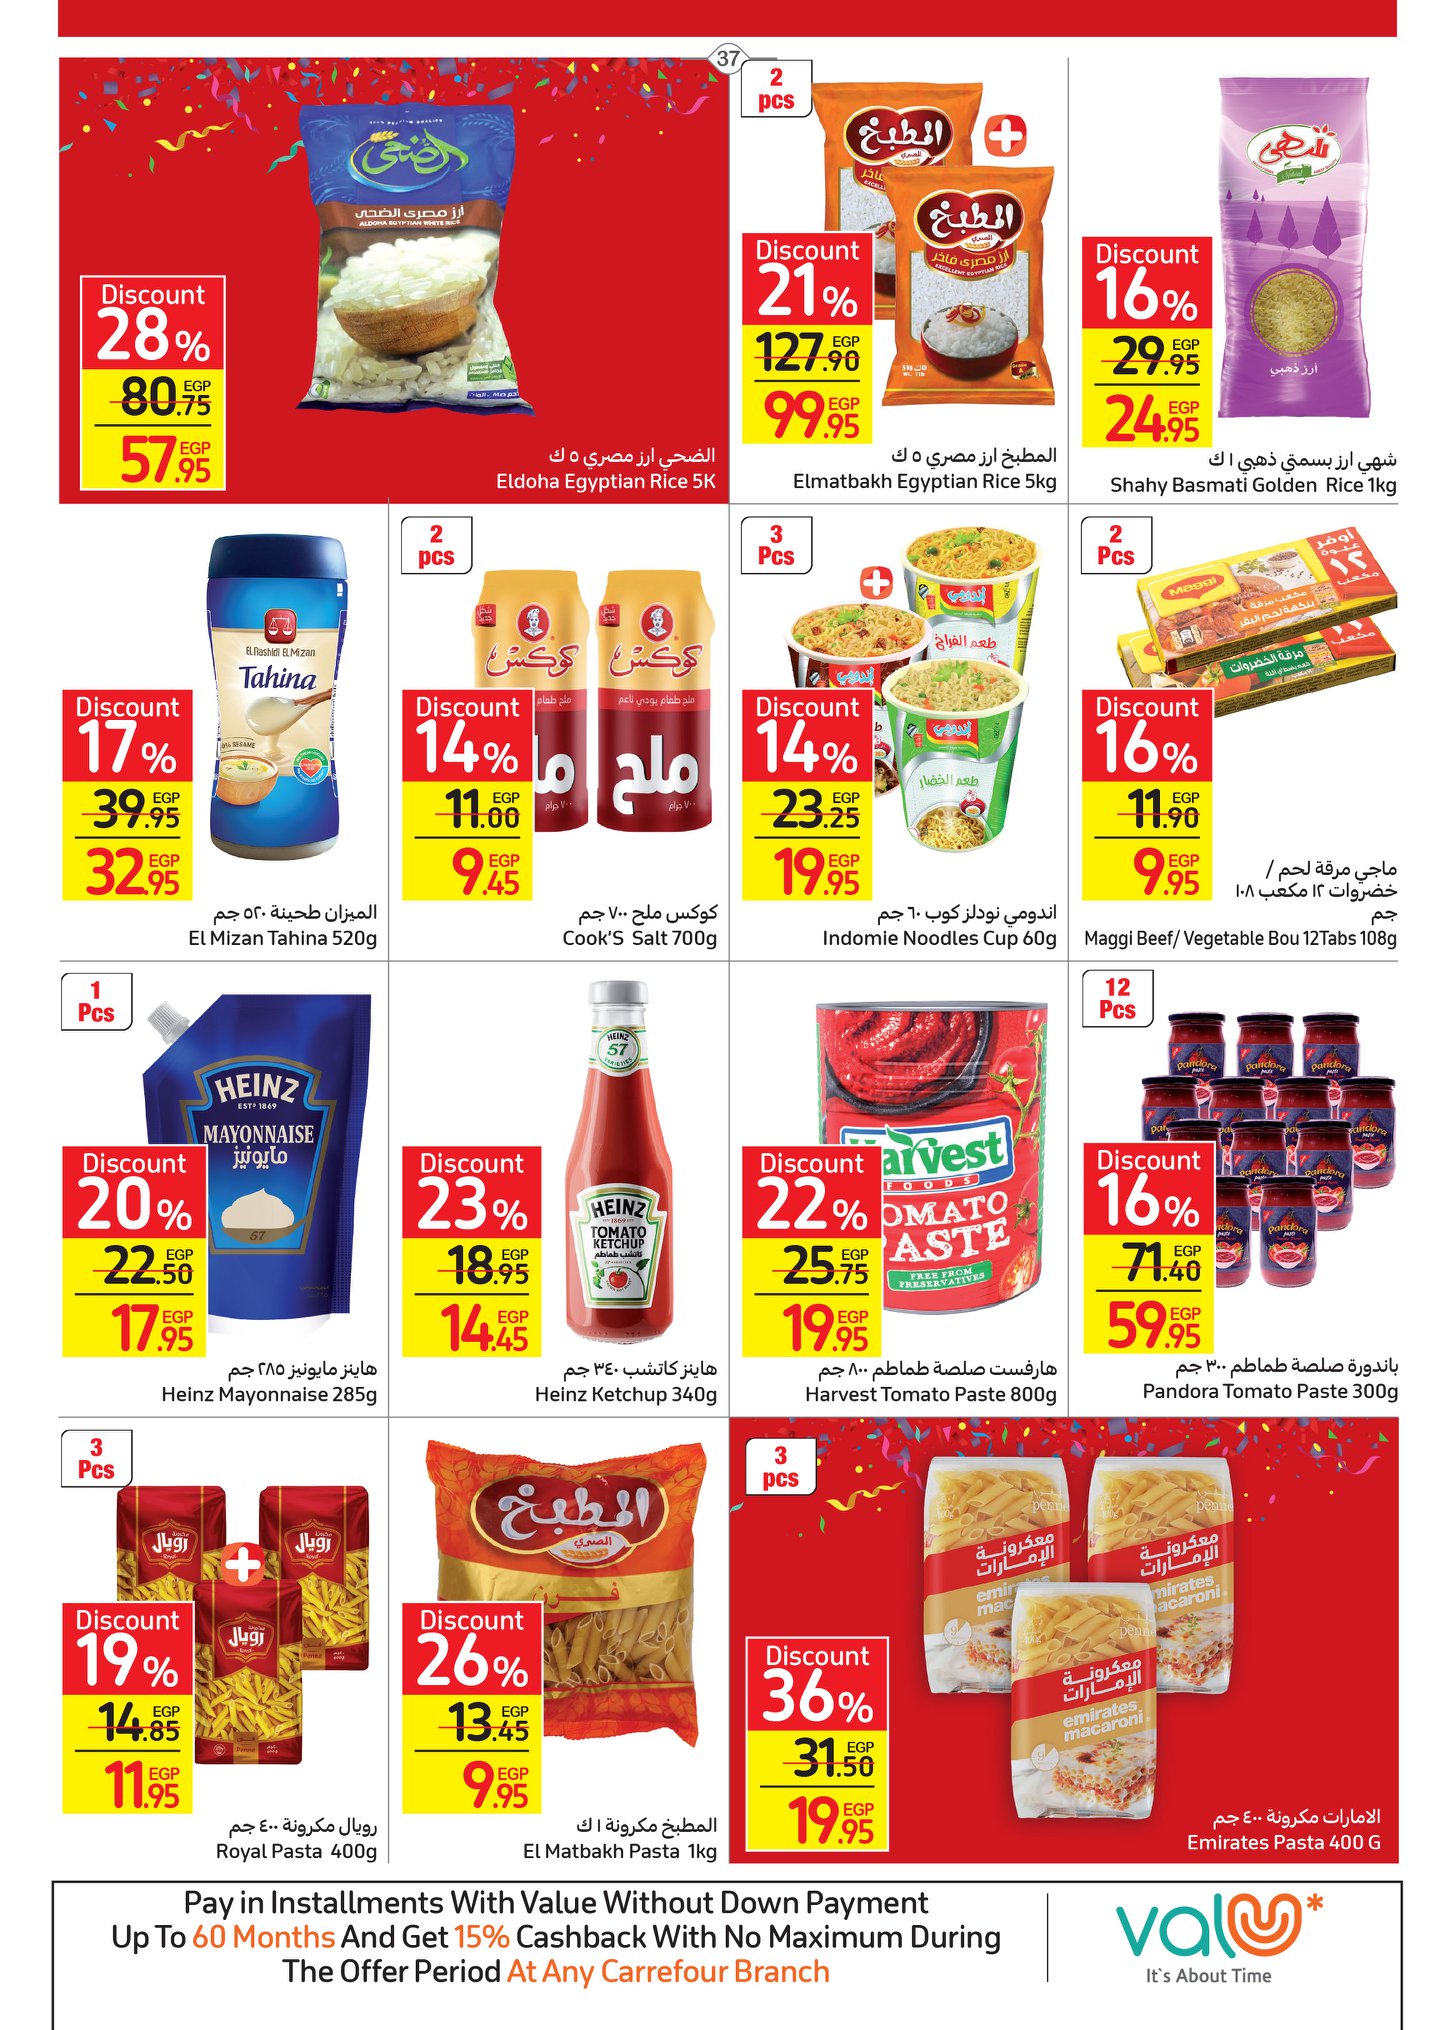 Carrefour magazine offers complete with 50% discounts and a surprise purchase in convenient installments without interest 43